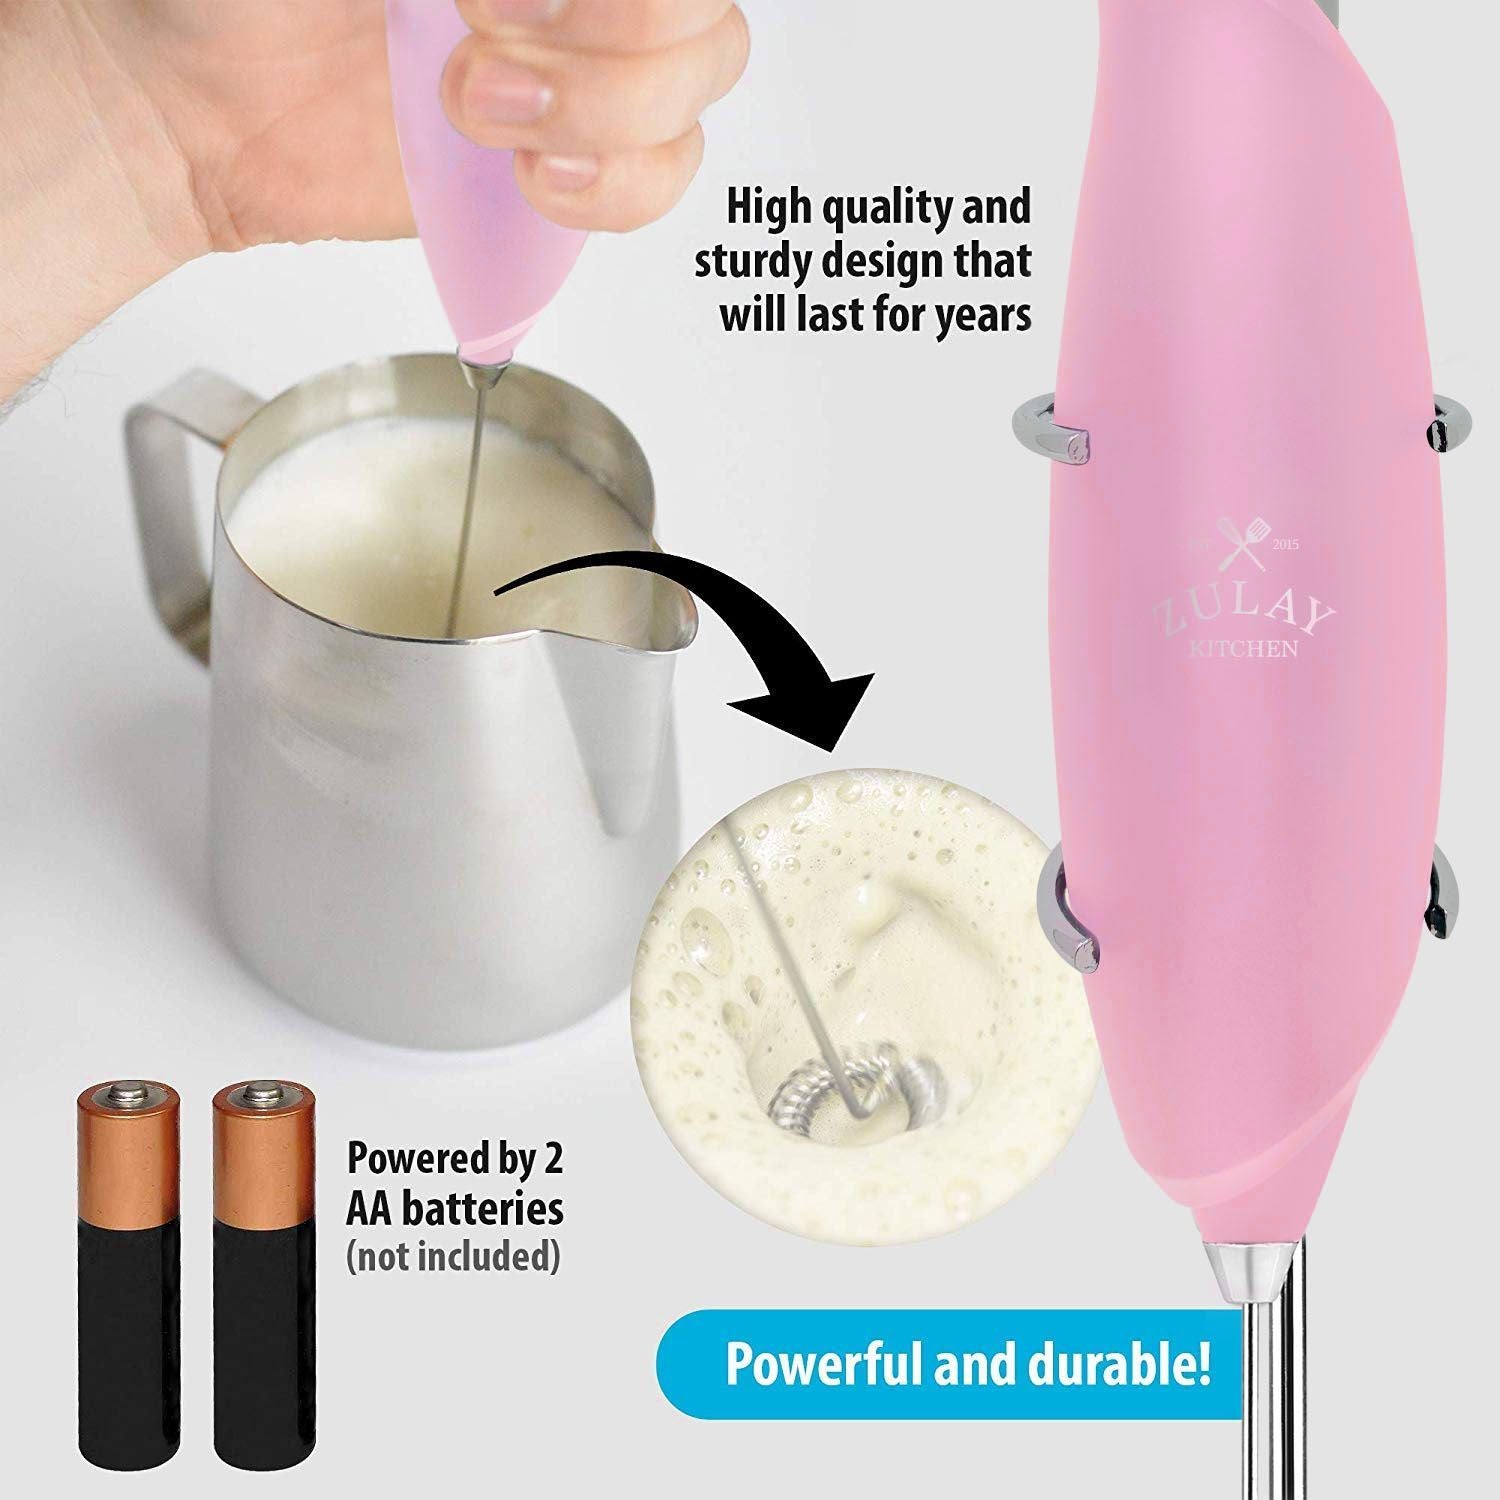 One Touch Milk Frother